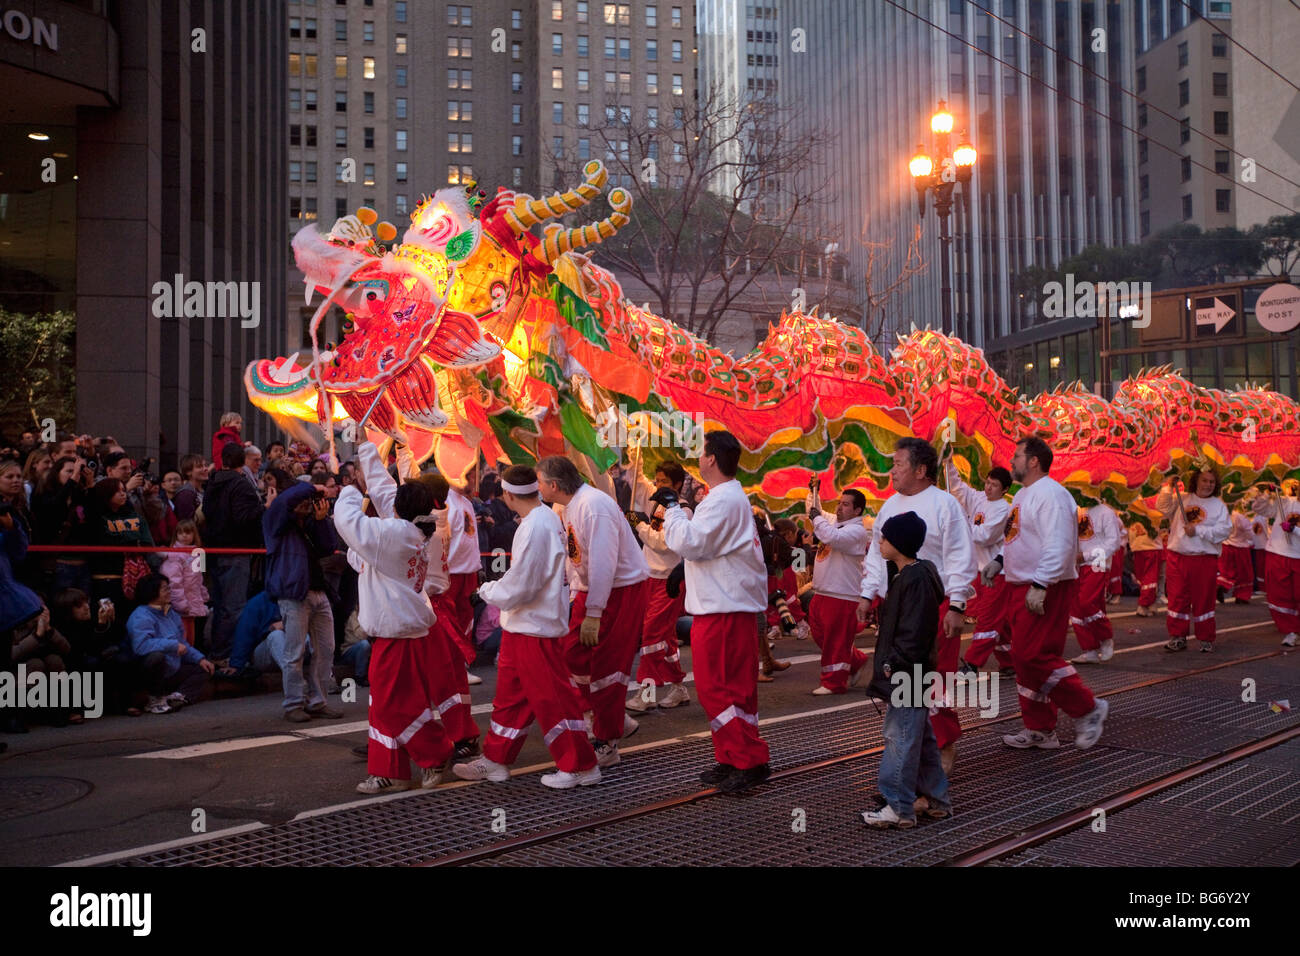 Chinese New Year's parade with dragon begins on Market Street in San Francisco, California. Stock Photo